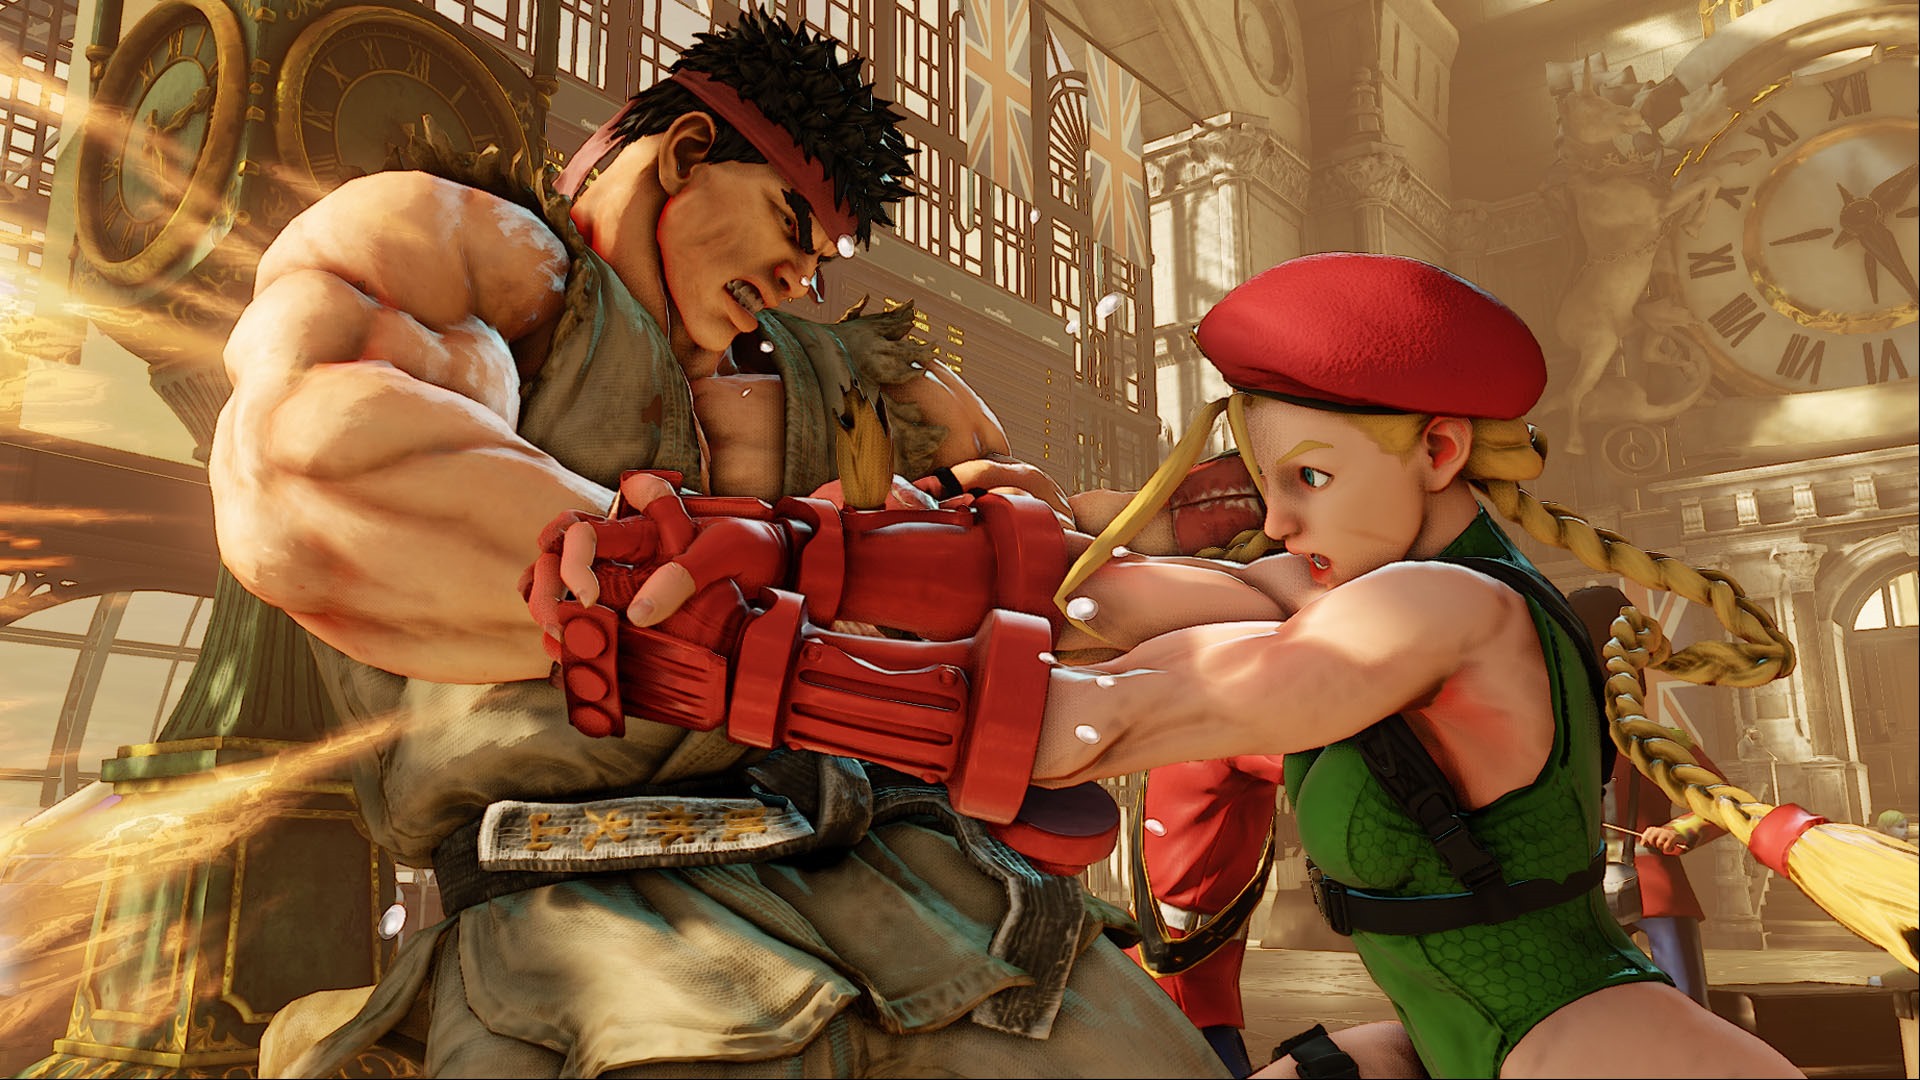 Street Fighter 6 Classic Costumes for Ryu, Chun-Li, Guile Revealed -  Siliconera